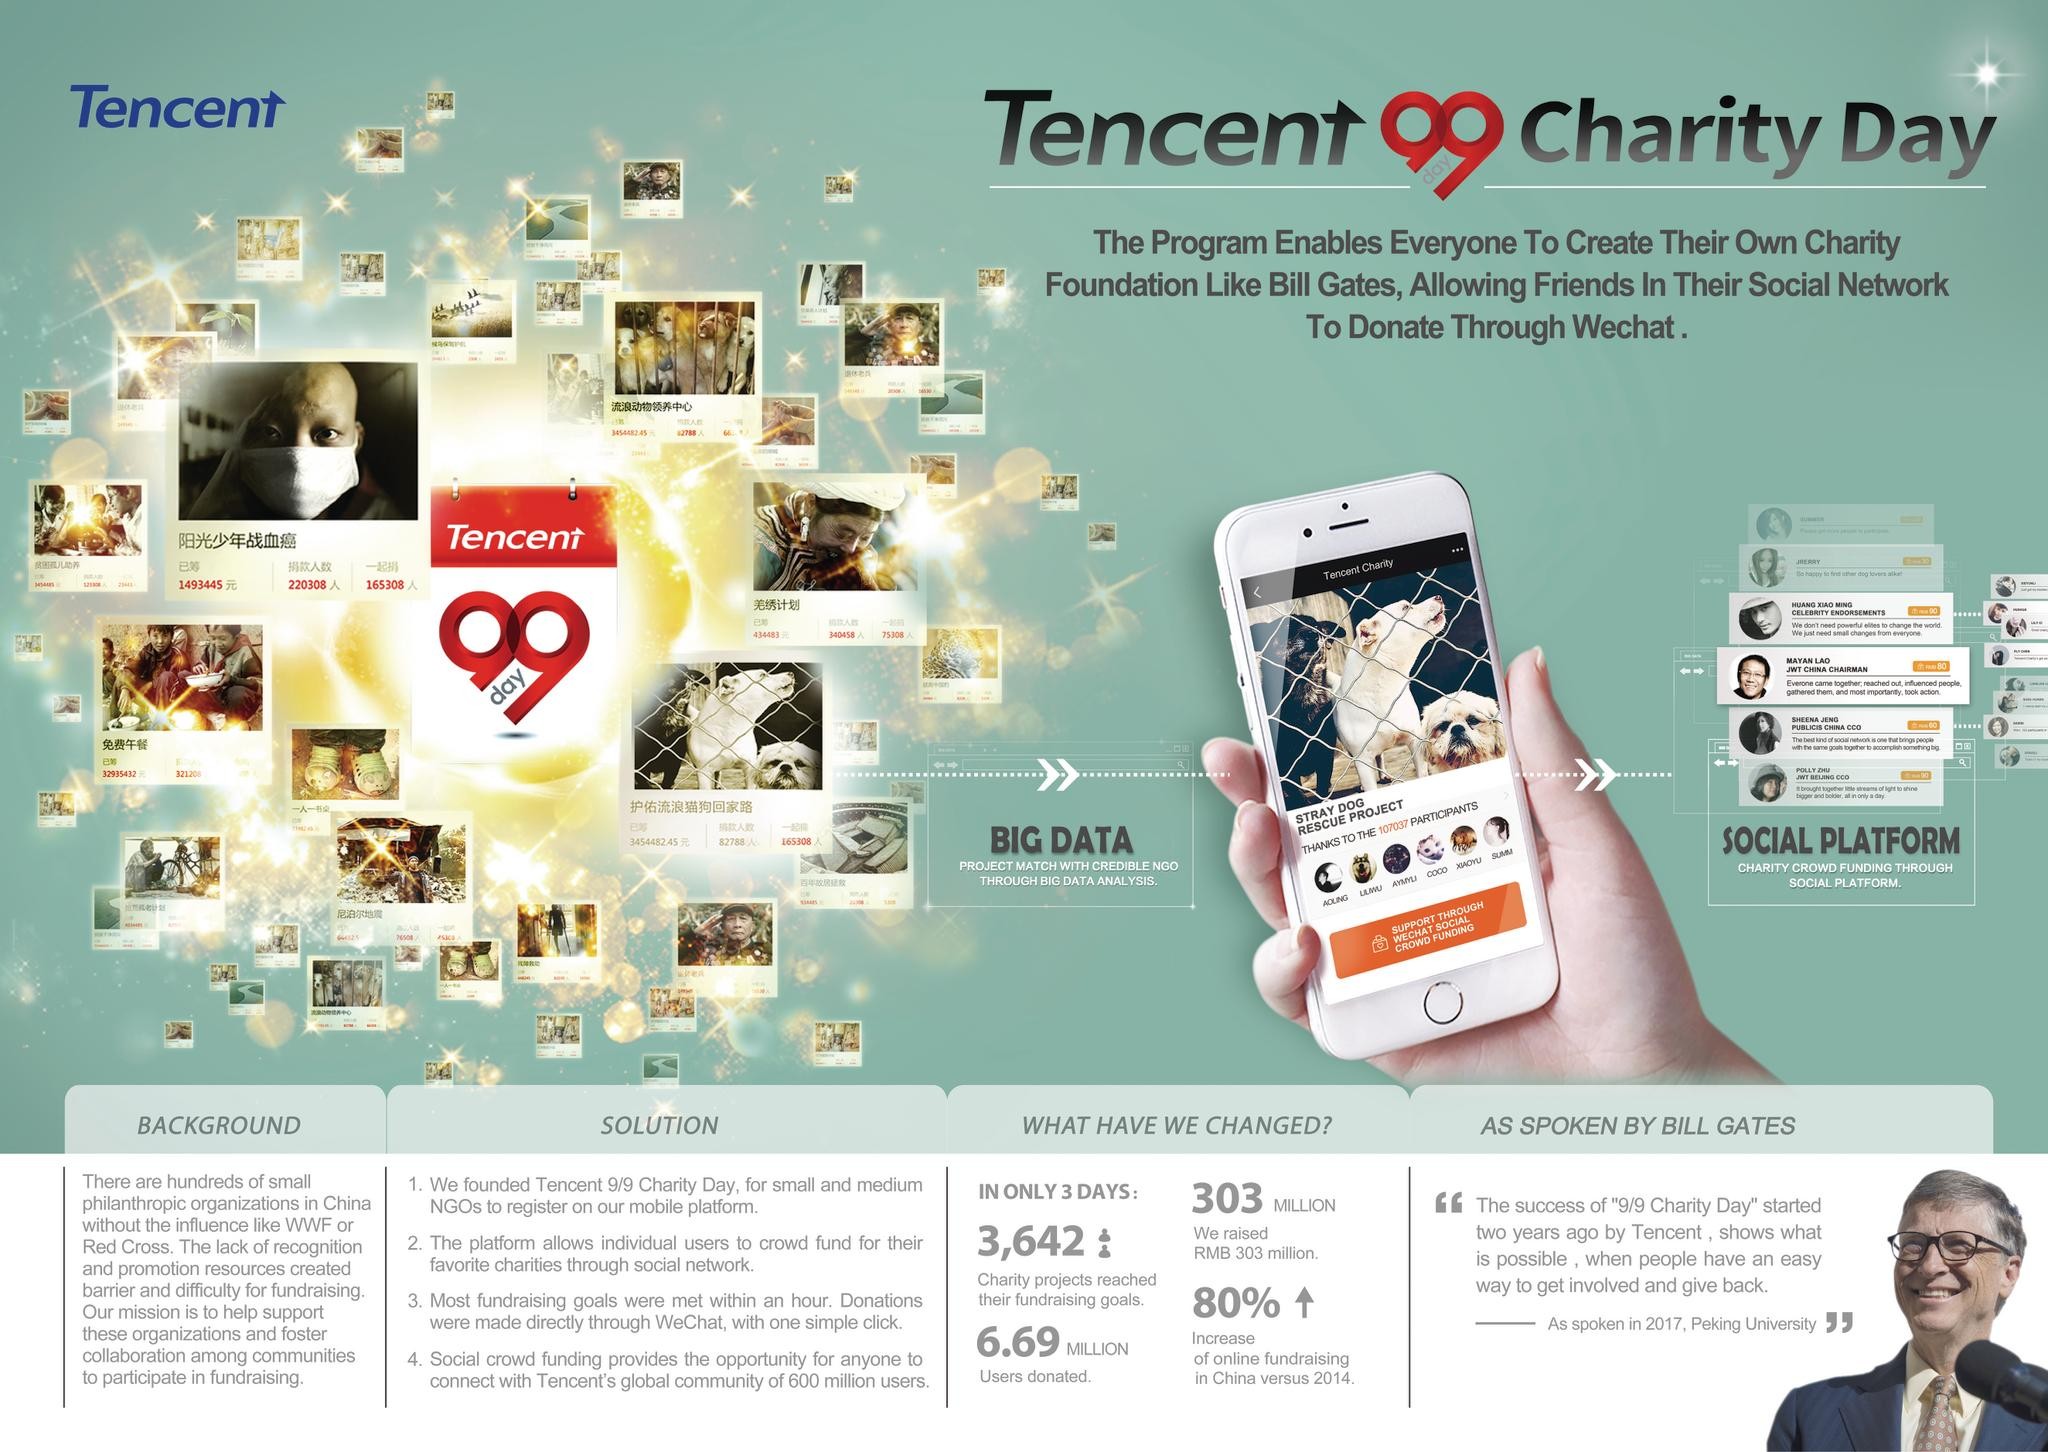 Tencent 9/9 Charity Day